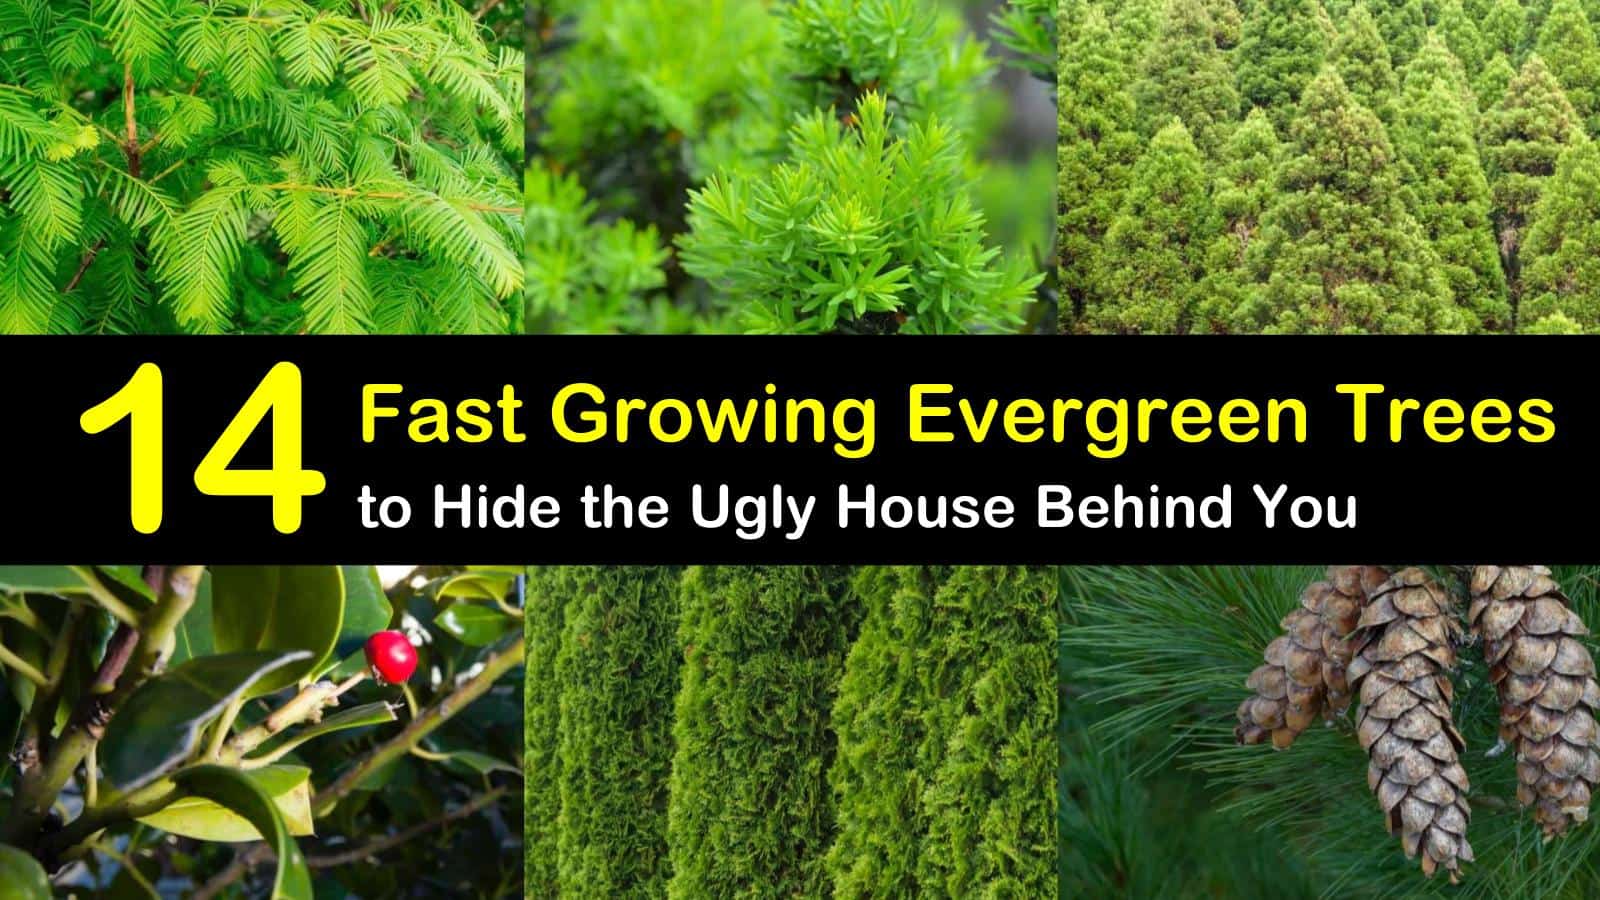 13 Fast Growing Evergreen Trees to Hide the Ugly House Behind You